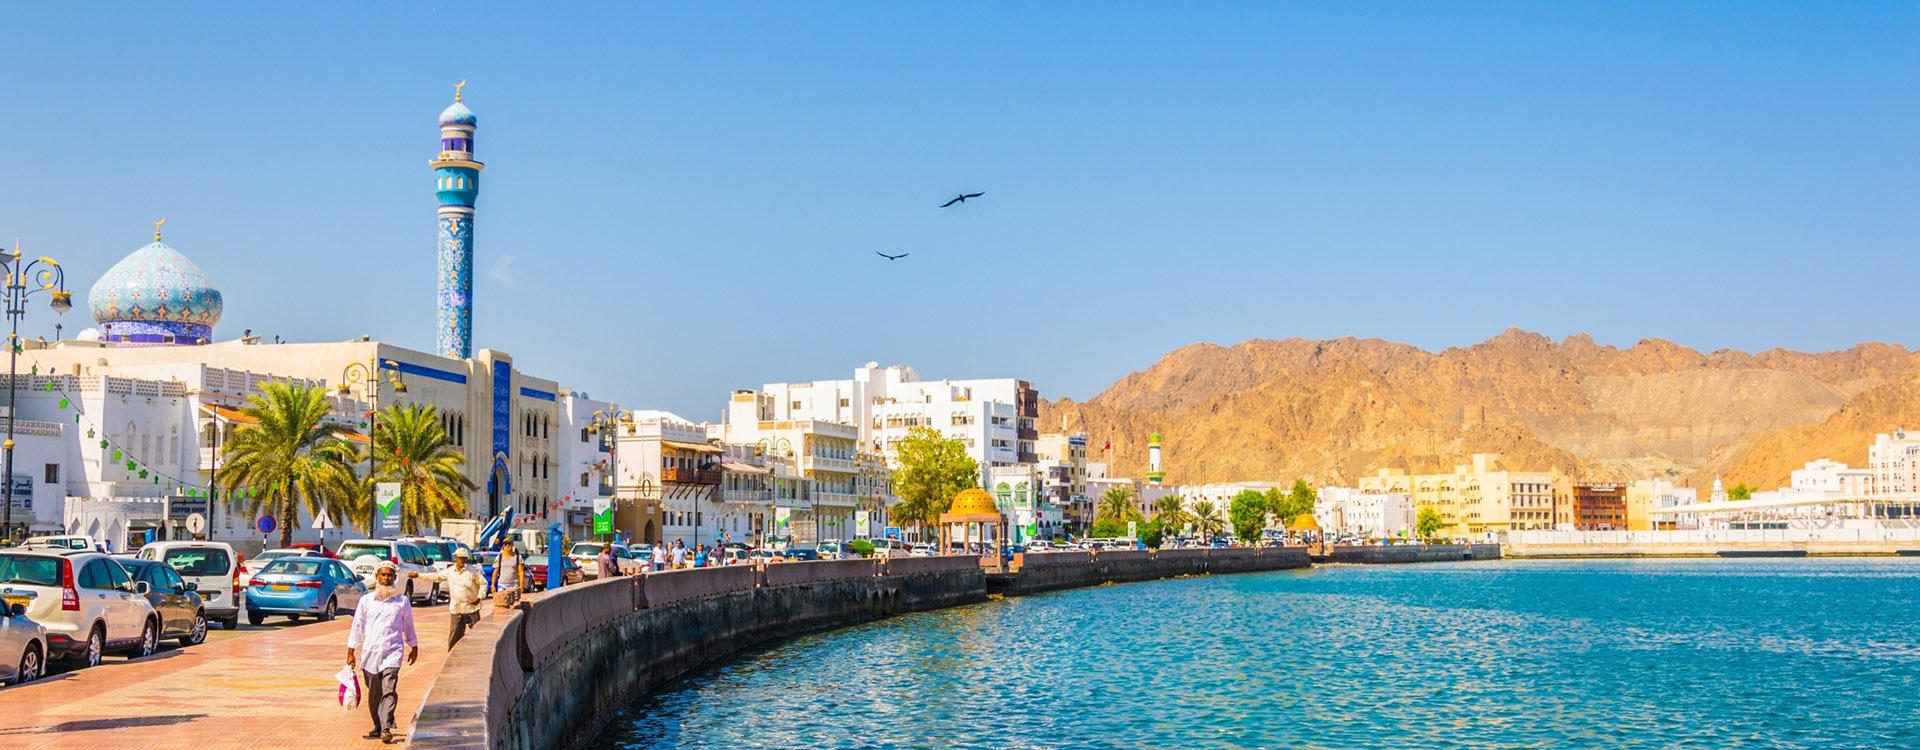 View of coastline of Muttrah district of Muscat, Oman.